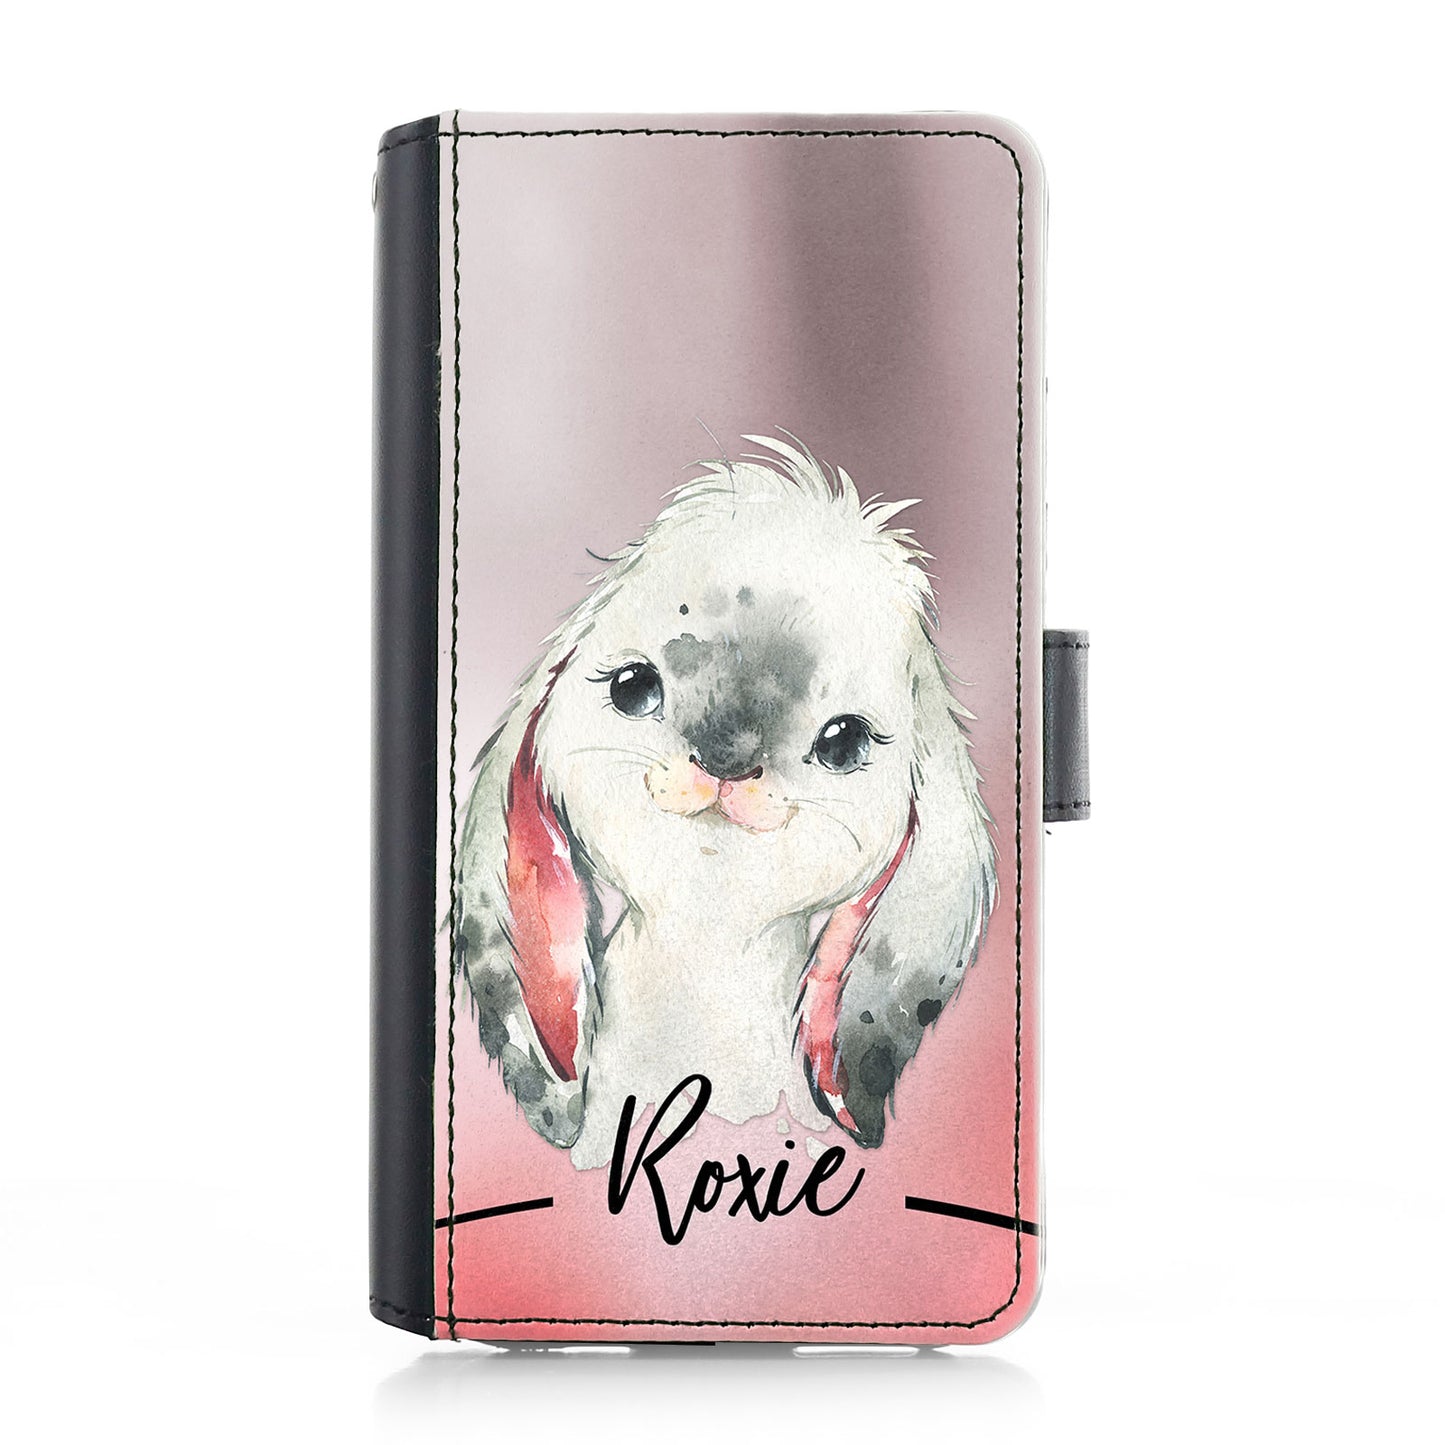 Personalised iPhone Leather Case - Baby Bunny Rabbit and Name